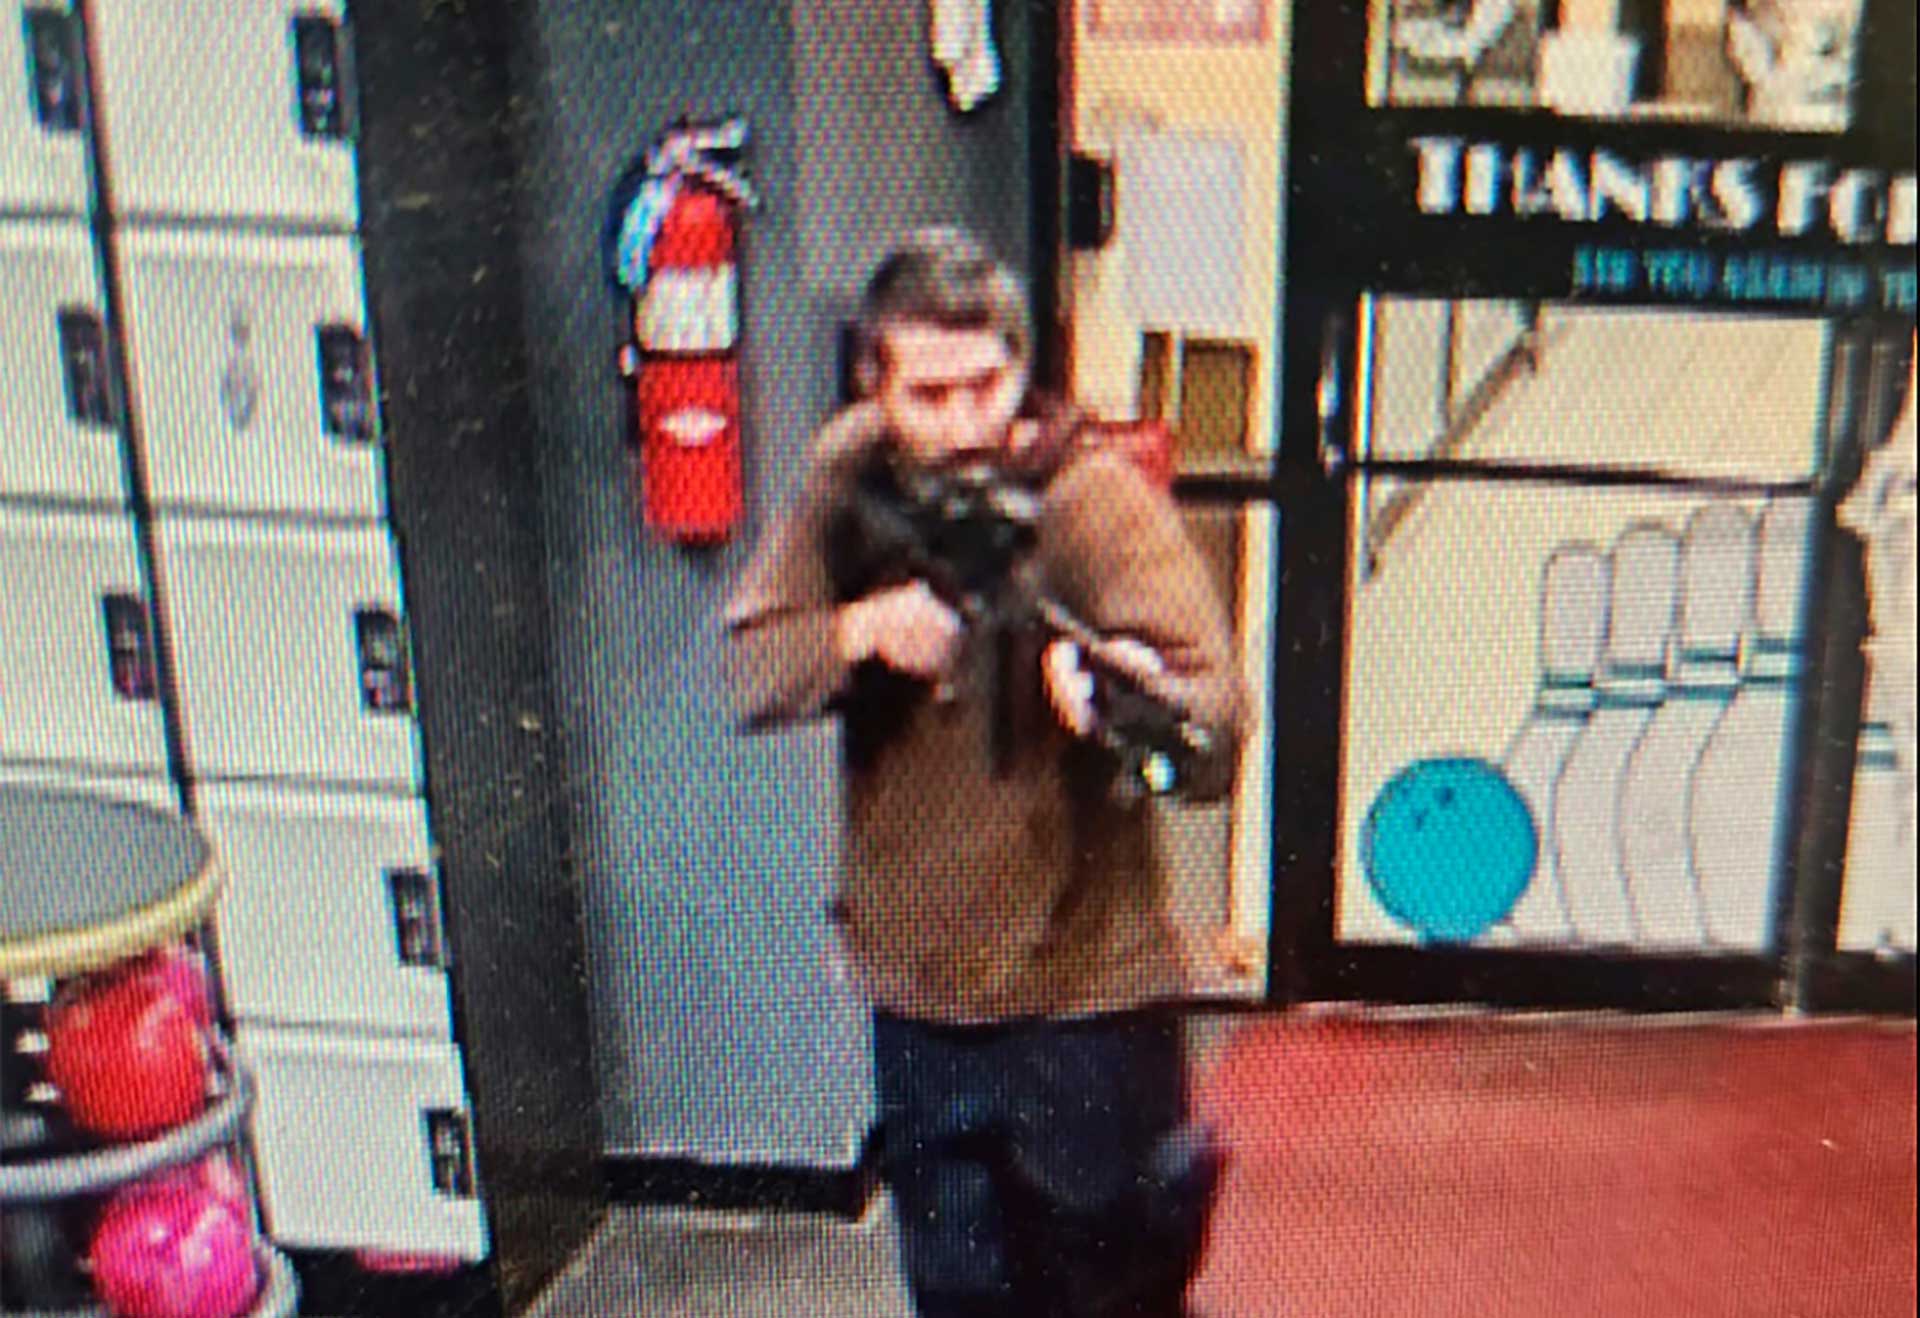 In this image taken from video released by the Androscoggin County Sheriff's Office, shows the d gunman pointing a gun while entering Sparetime Recreation in Lewiston, Maine, on Wednesday, Oct 25. (Androscoggin County Sheriff's Office via AP)